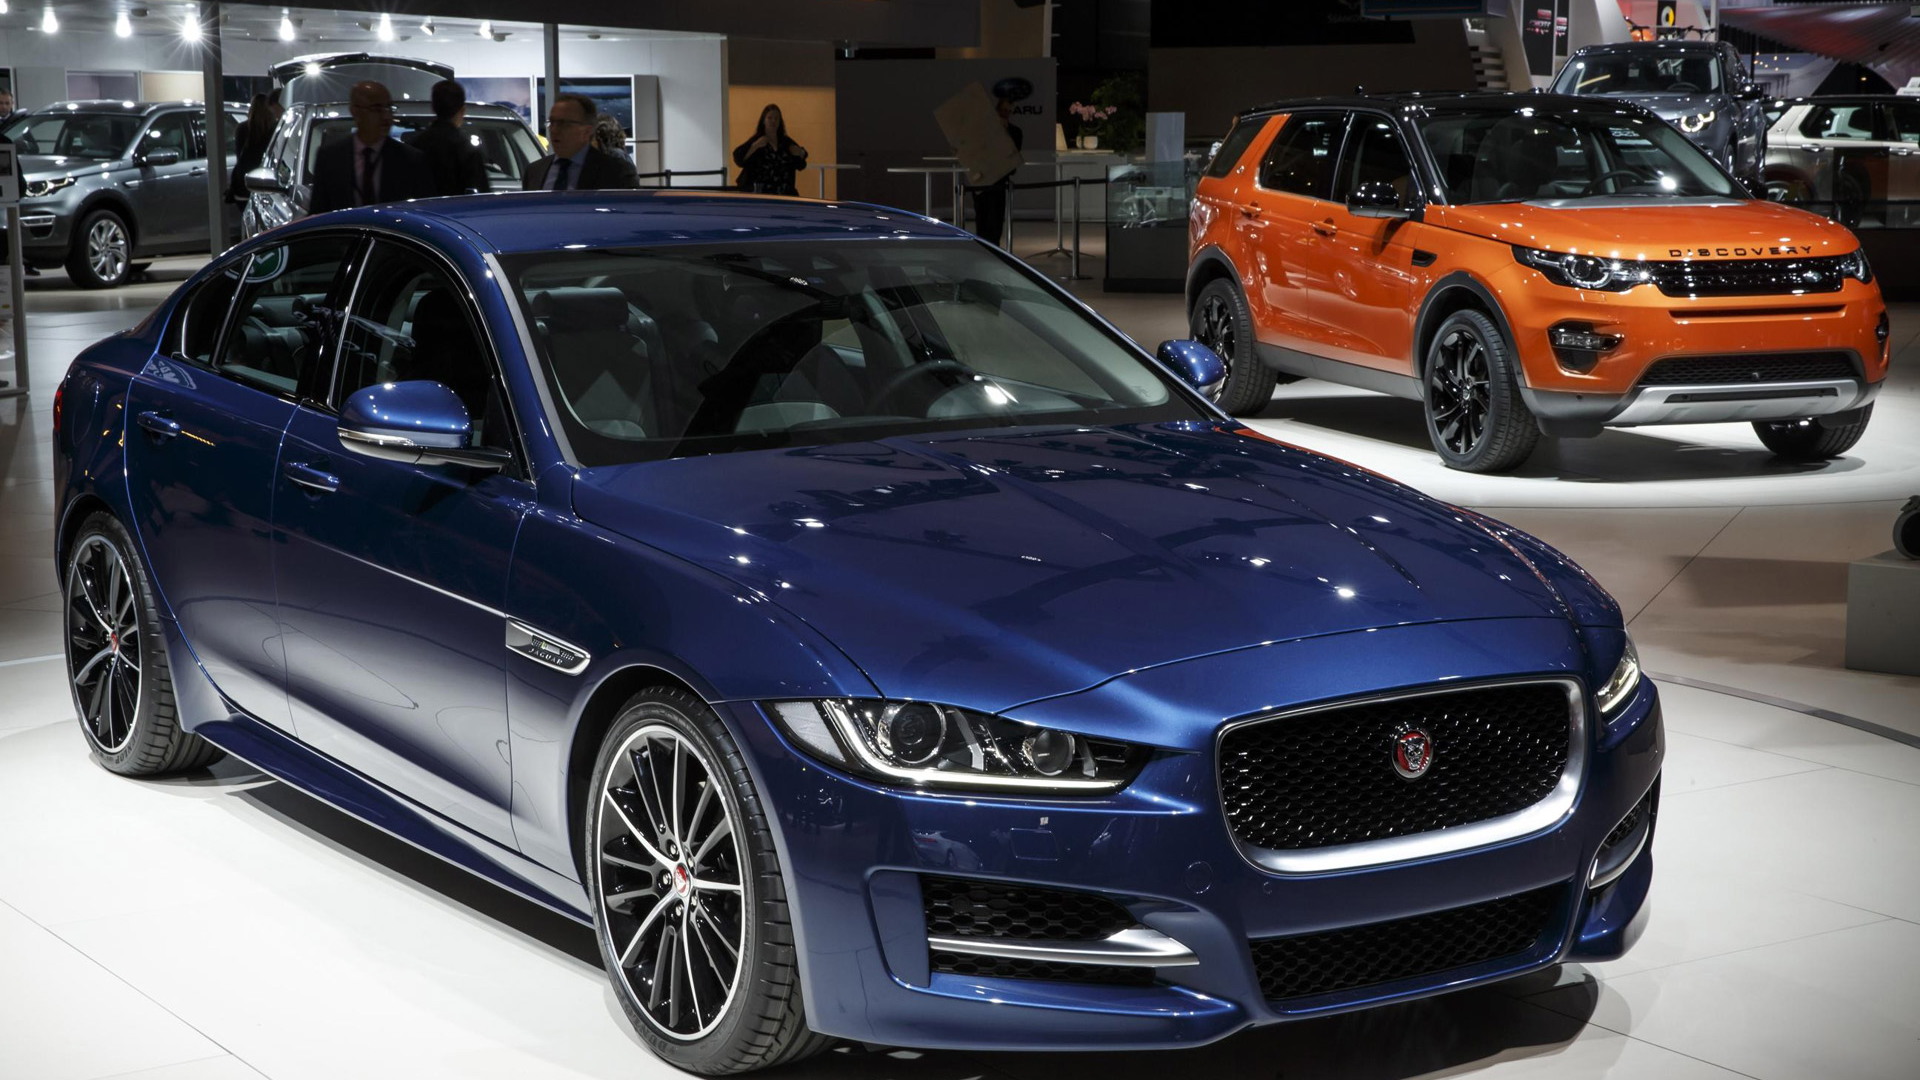 2017 Jaguar XE and 2016 Land Rover Discovery Sport